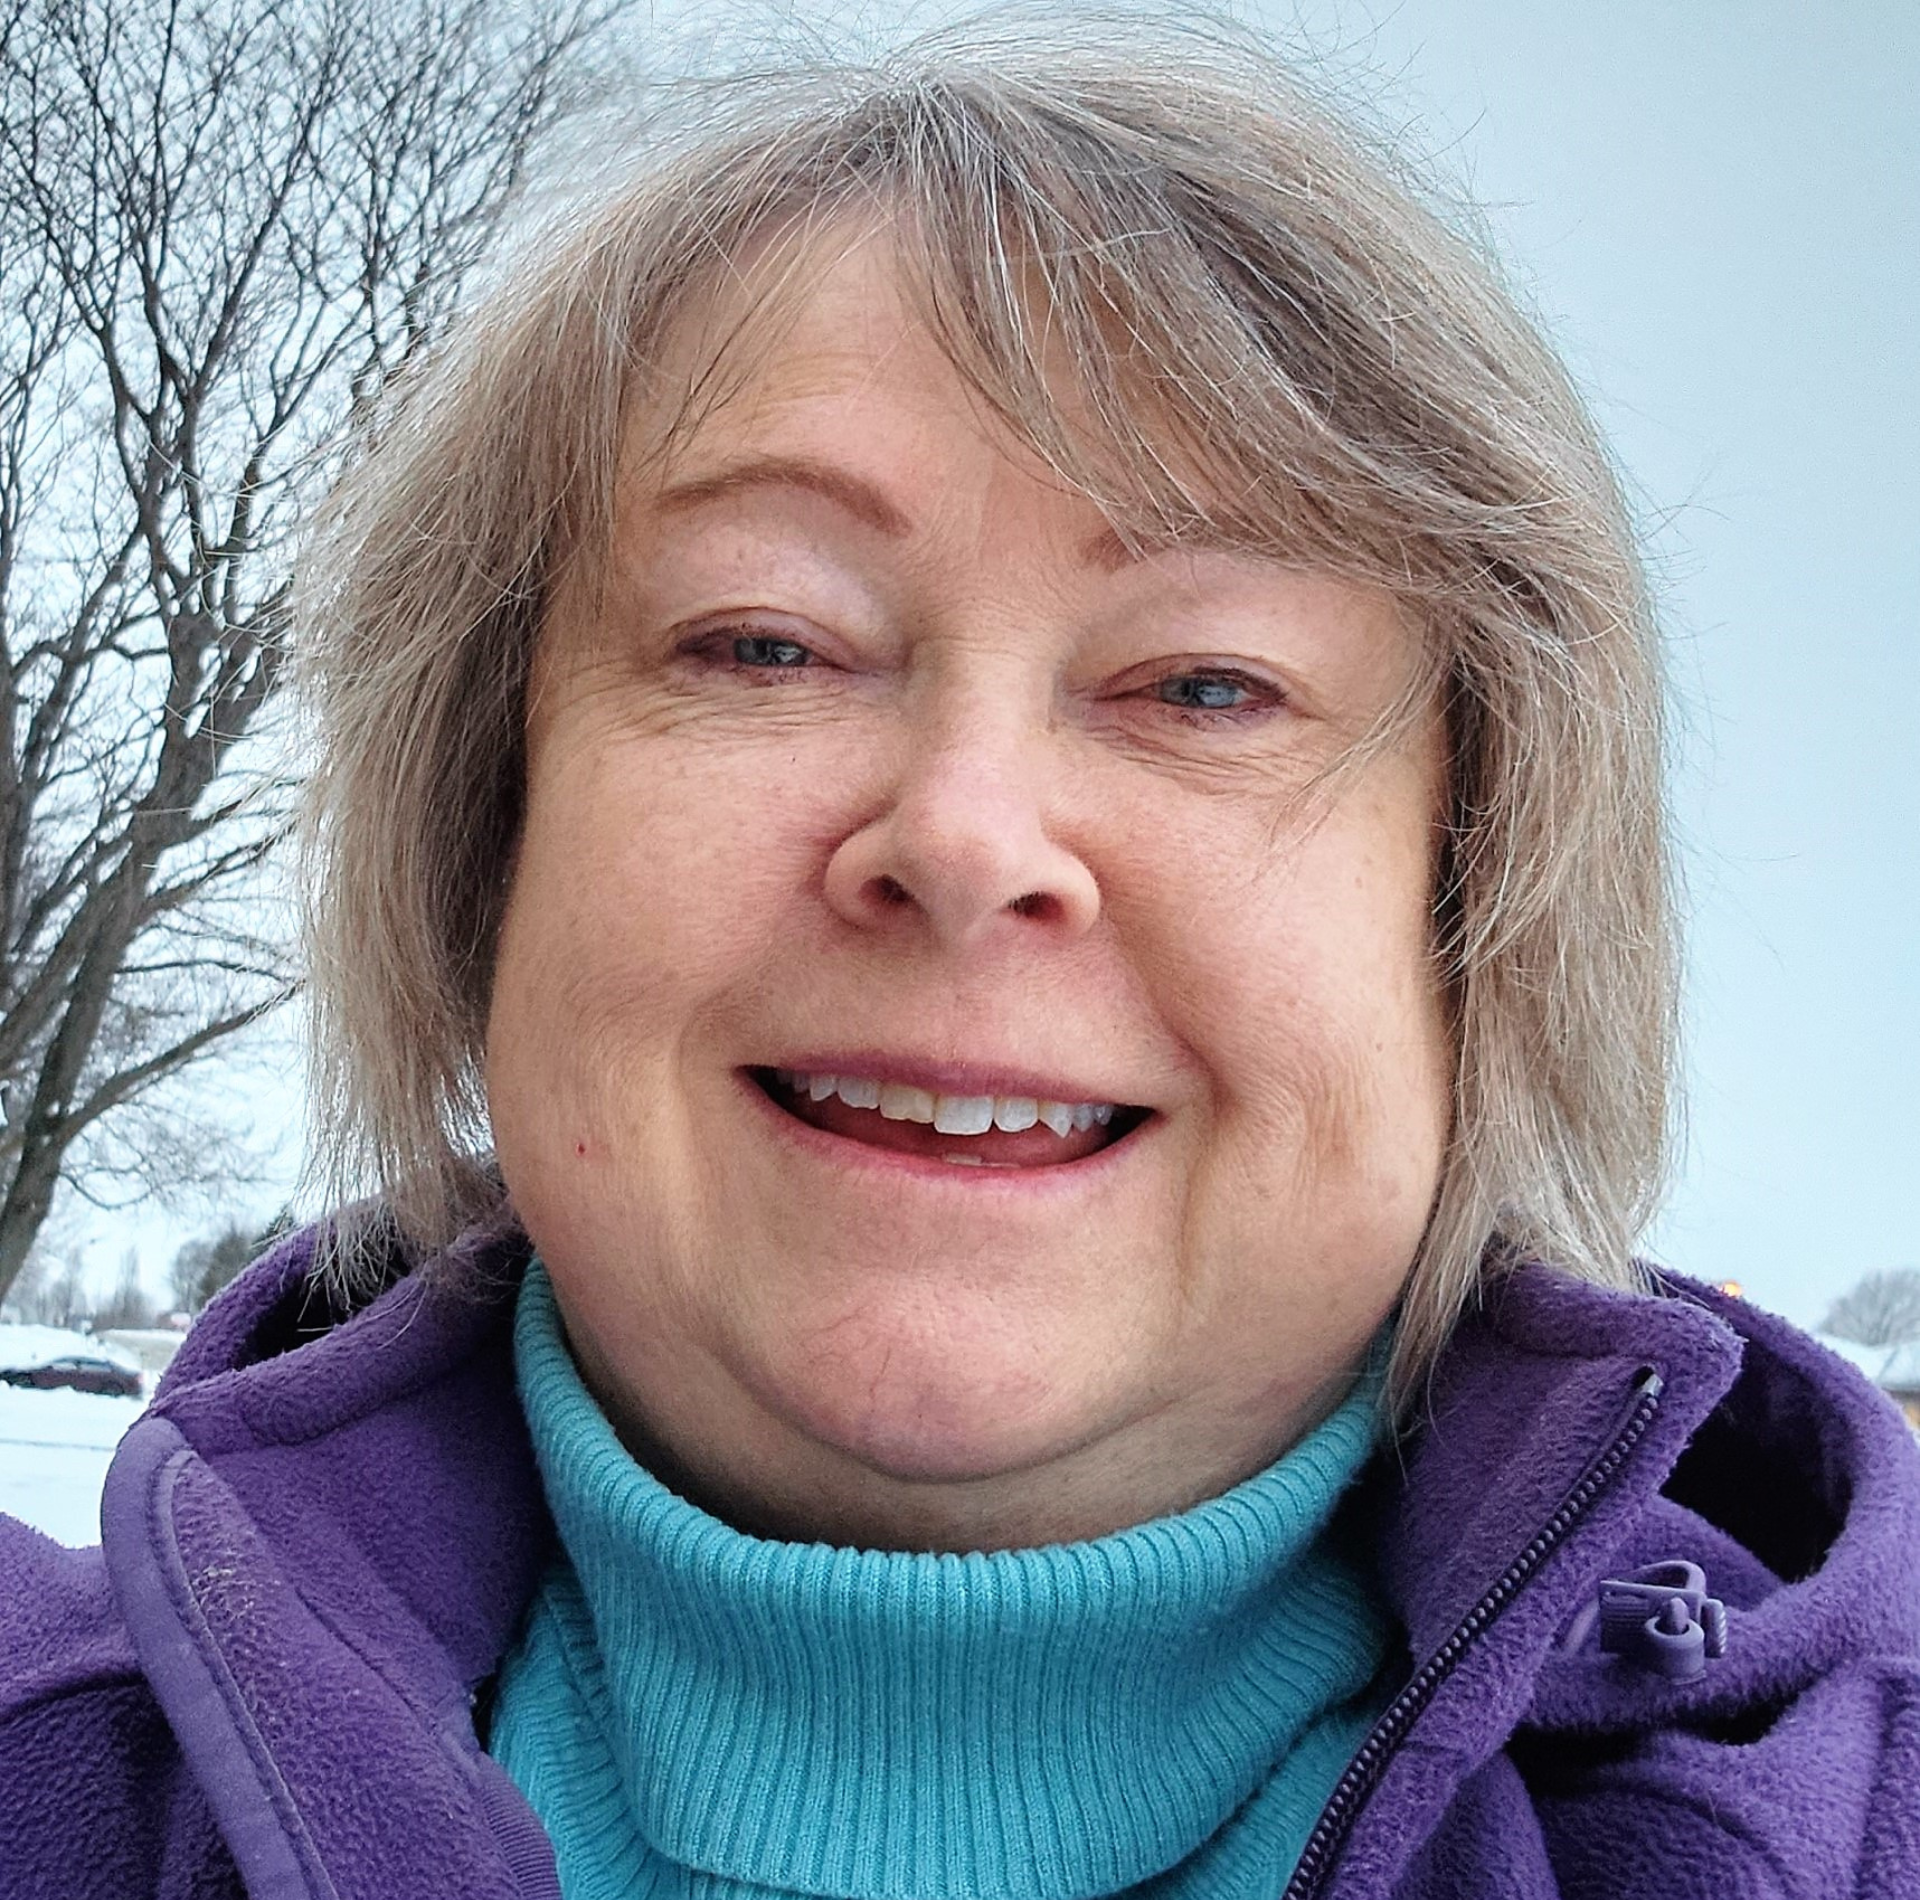 A woman wearing a purple jacket and a blue turtleneck is smiling.